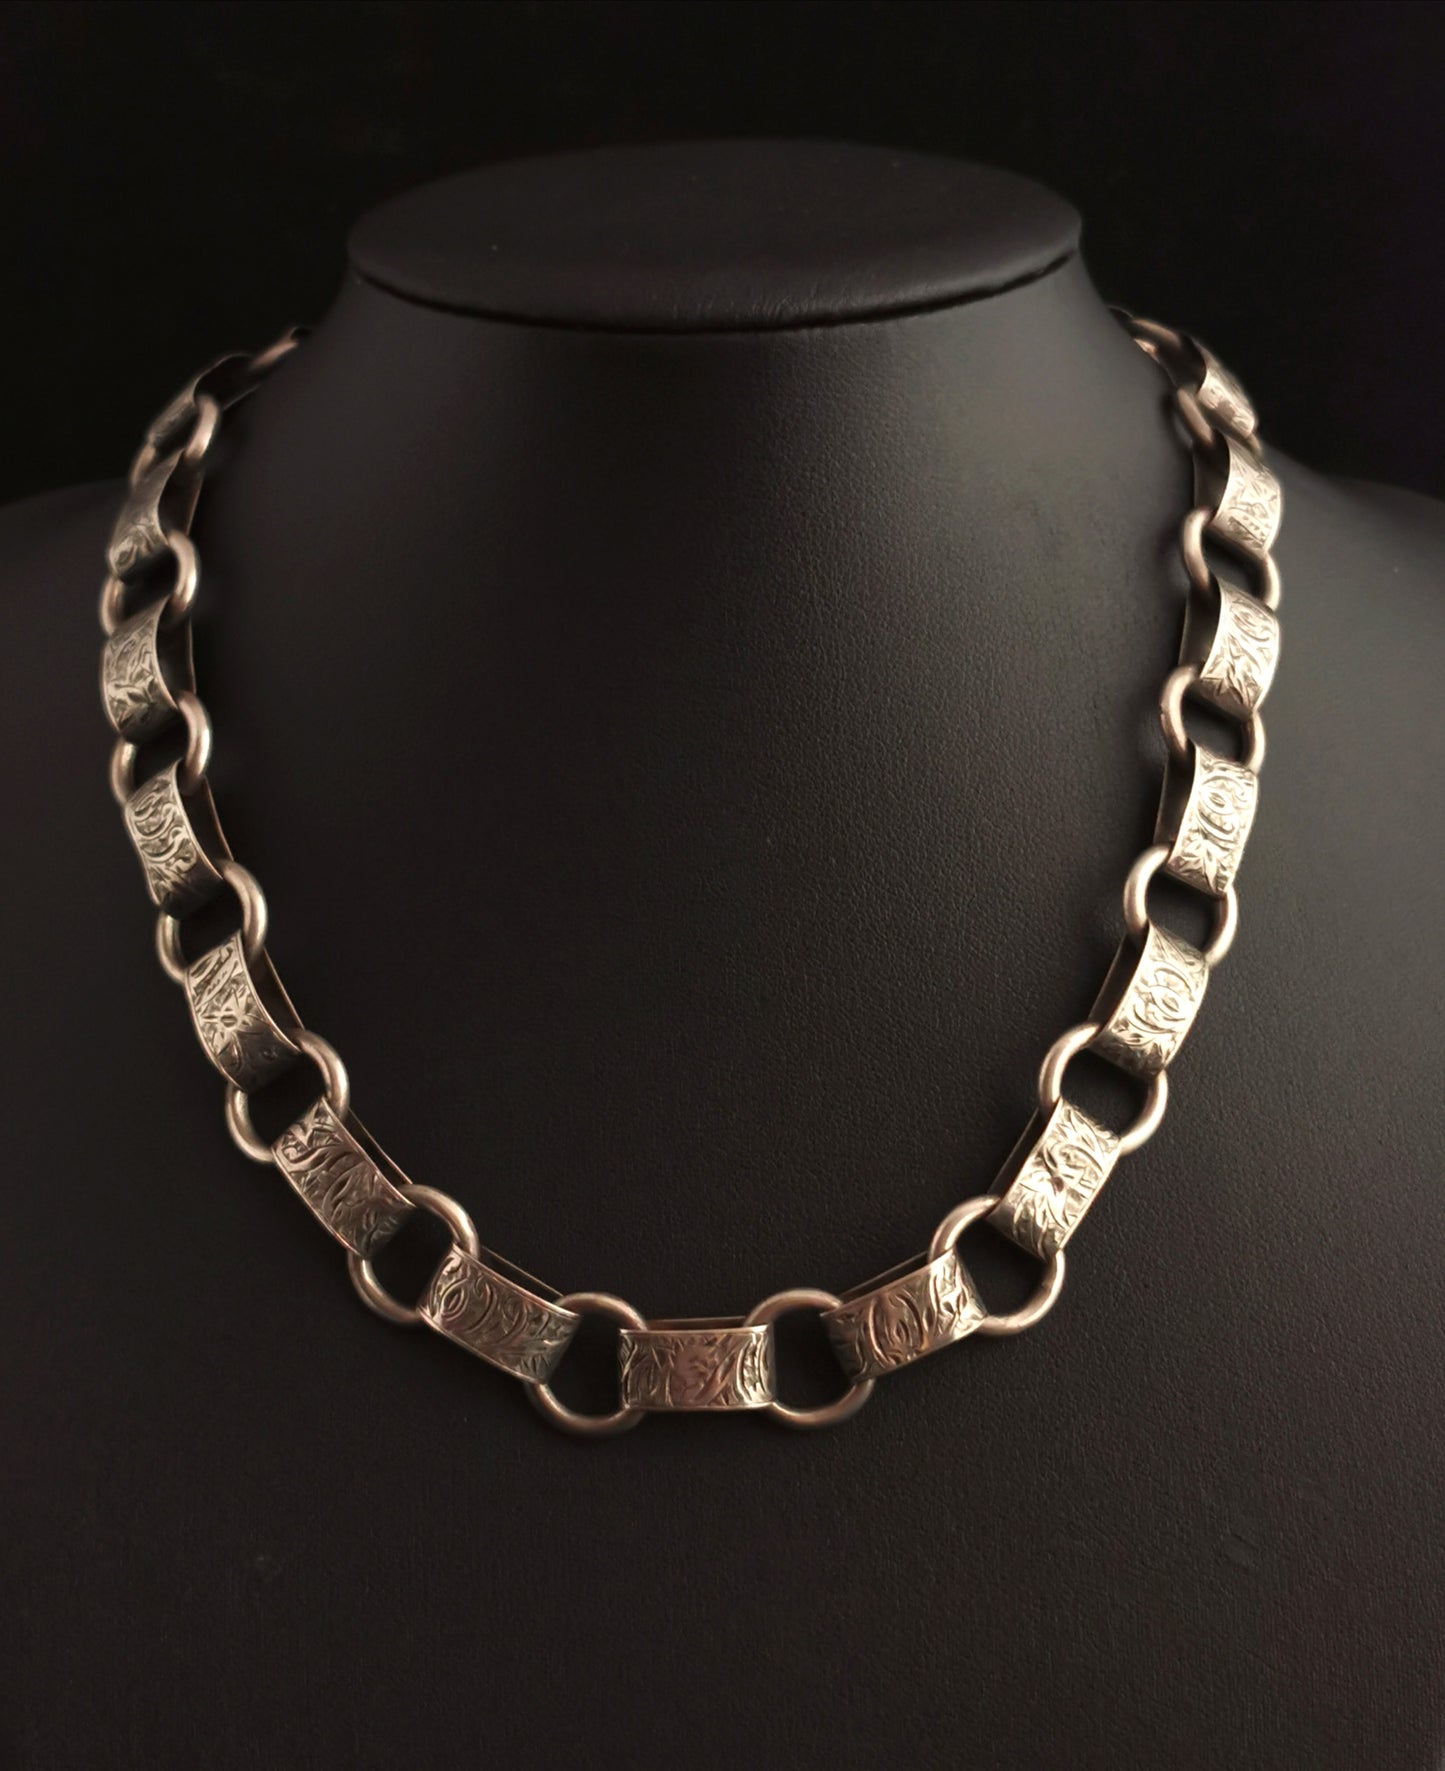 Antique Victorian silver collar necklace, engraved links